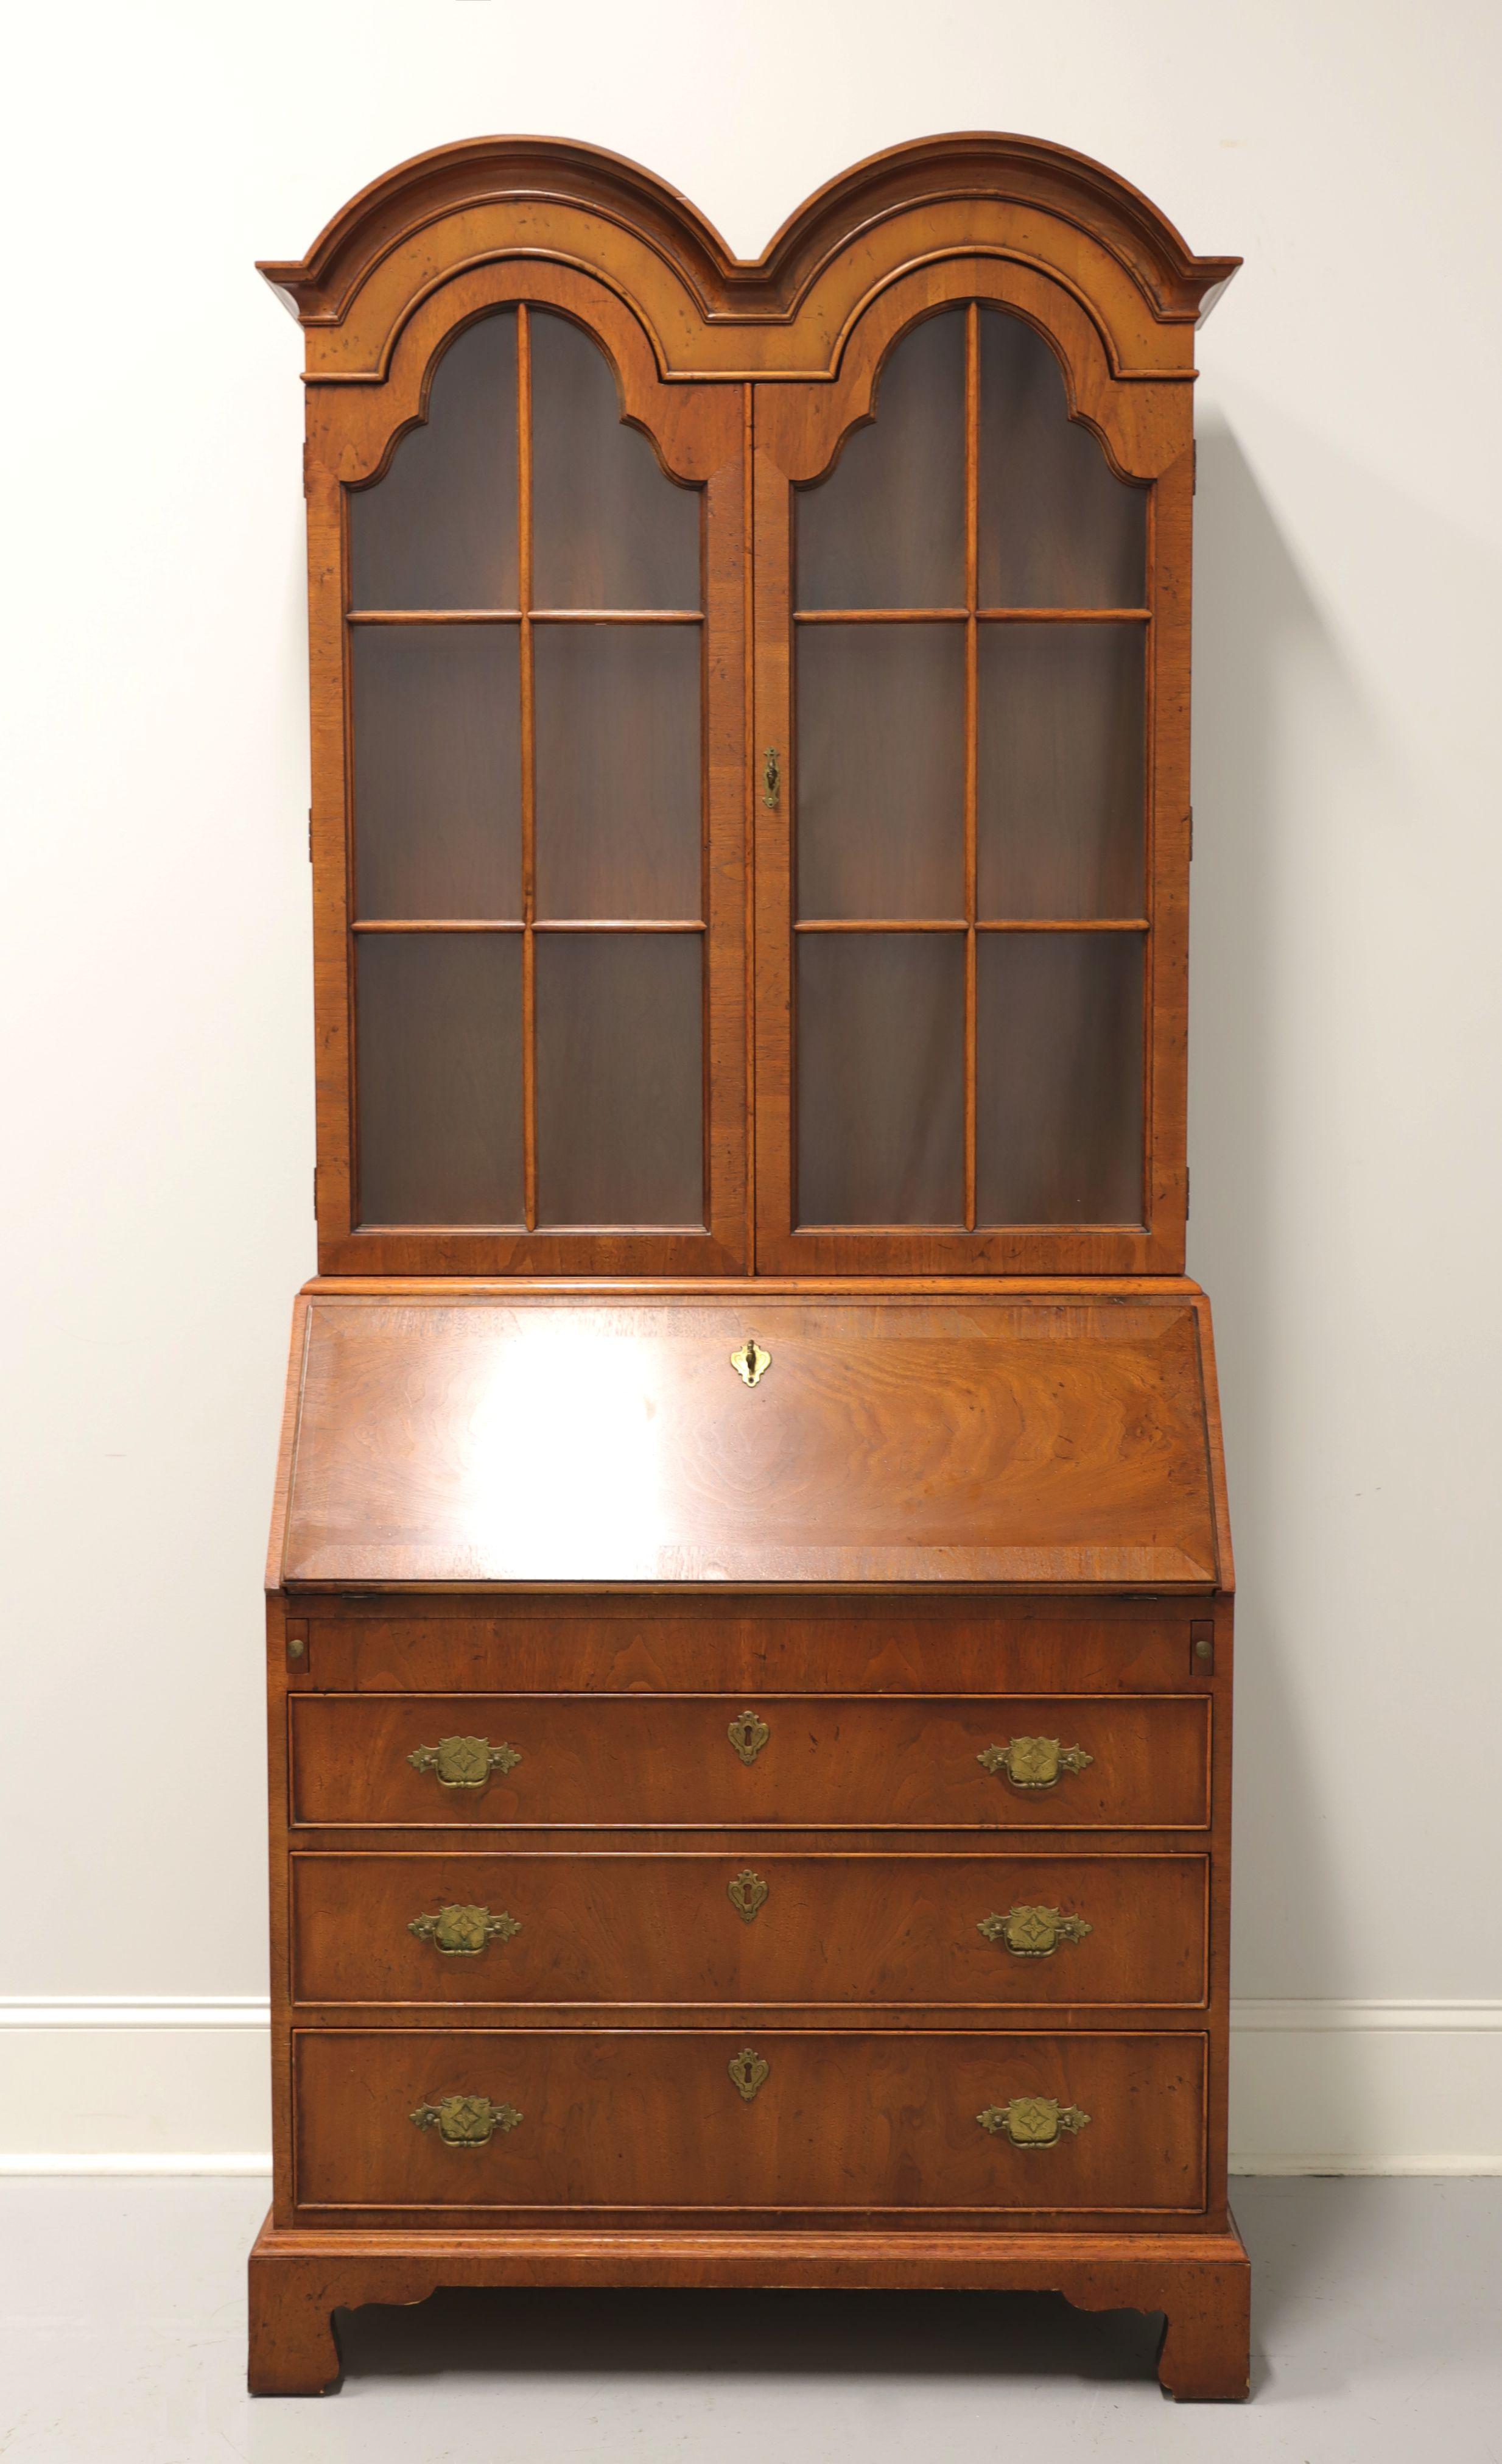 A Chippendale style secretary desk by Henredon, from their Folio 10 Collection. Burl walnut with brass hardware, double bonnet top, crown moulding, banded desk front and bracket feet. Upper cabinet features two arched doors with paned glass